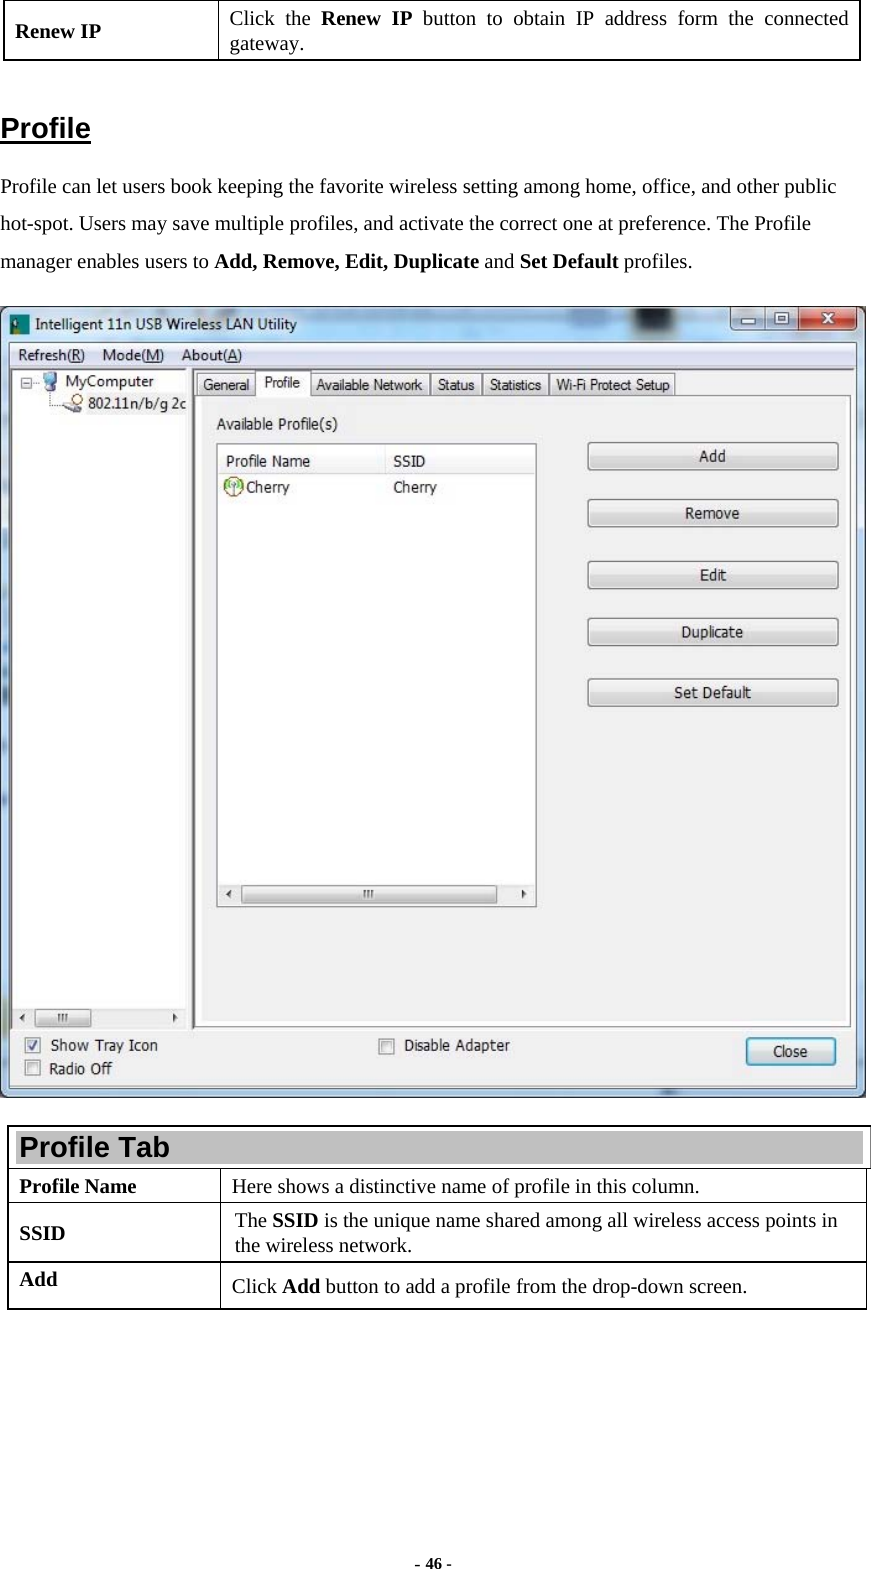  - 46 - Renew IP  Click the Renew IP button to obtain IP address form the connected gateway.  Profile Profile can let users book keeping the favorite wireless setting among home, office, and other public hot-spot. Users may save multiple profiles, and activate the correct one at preference. The Profile manager enables users to Add, Remove, Edit, Duplicate and Set Default profiles.  Profile Tab Profile Name  Here shows a distinctive name of profile in this column. SSID  The SSID is the unique name shared among all wireless access points in the wireless network. Add  Click Add button to add a profile from the drop-down screen. 